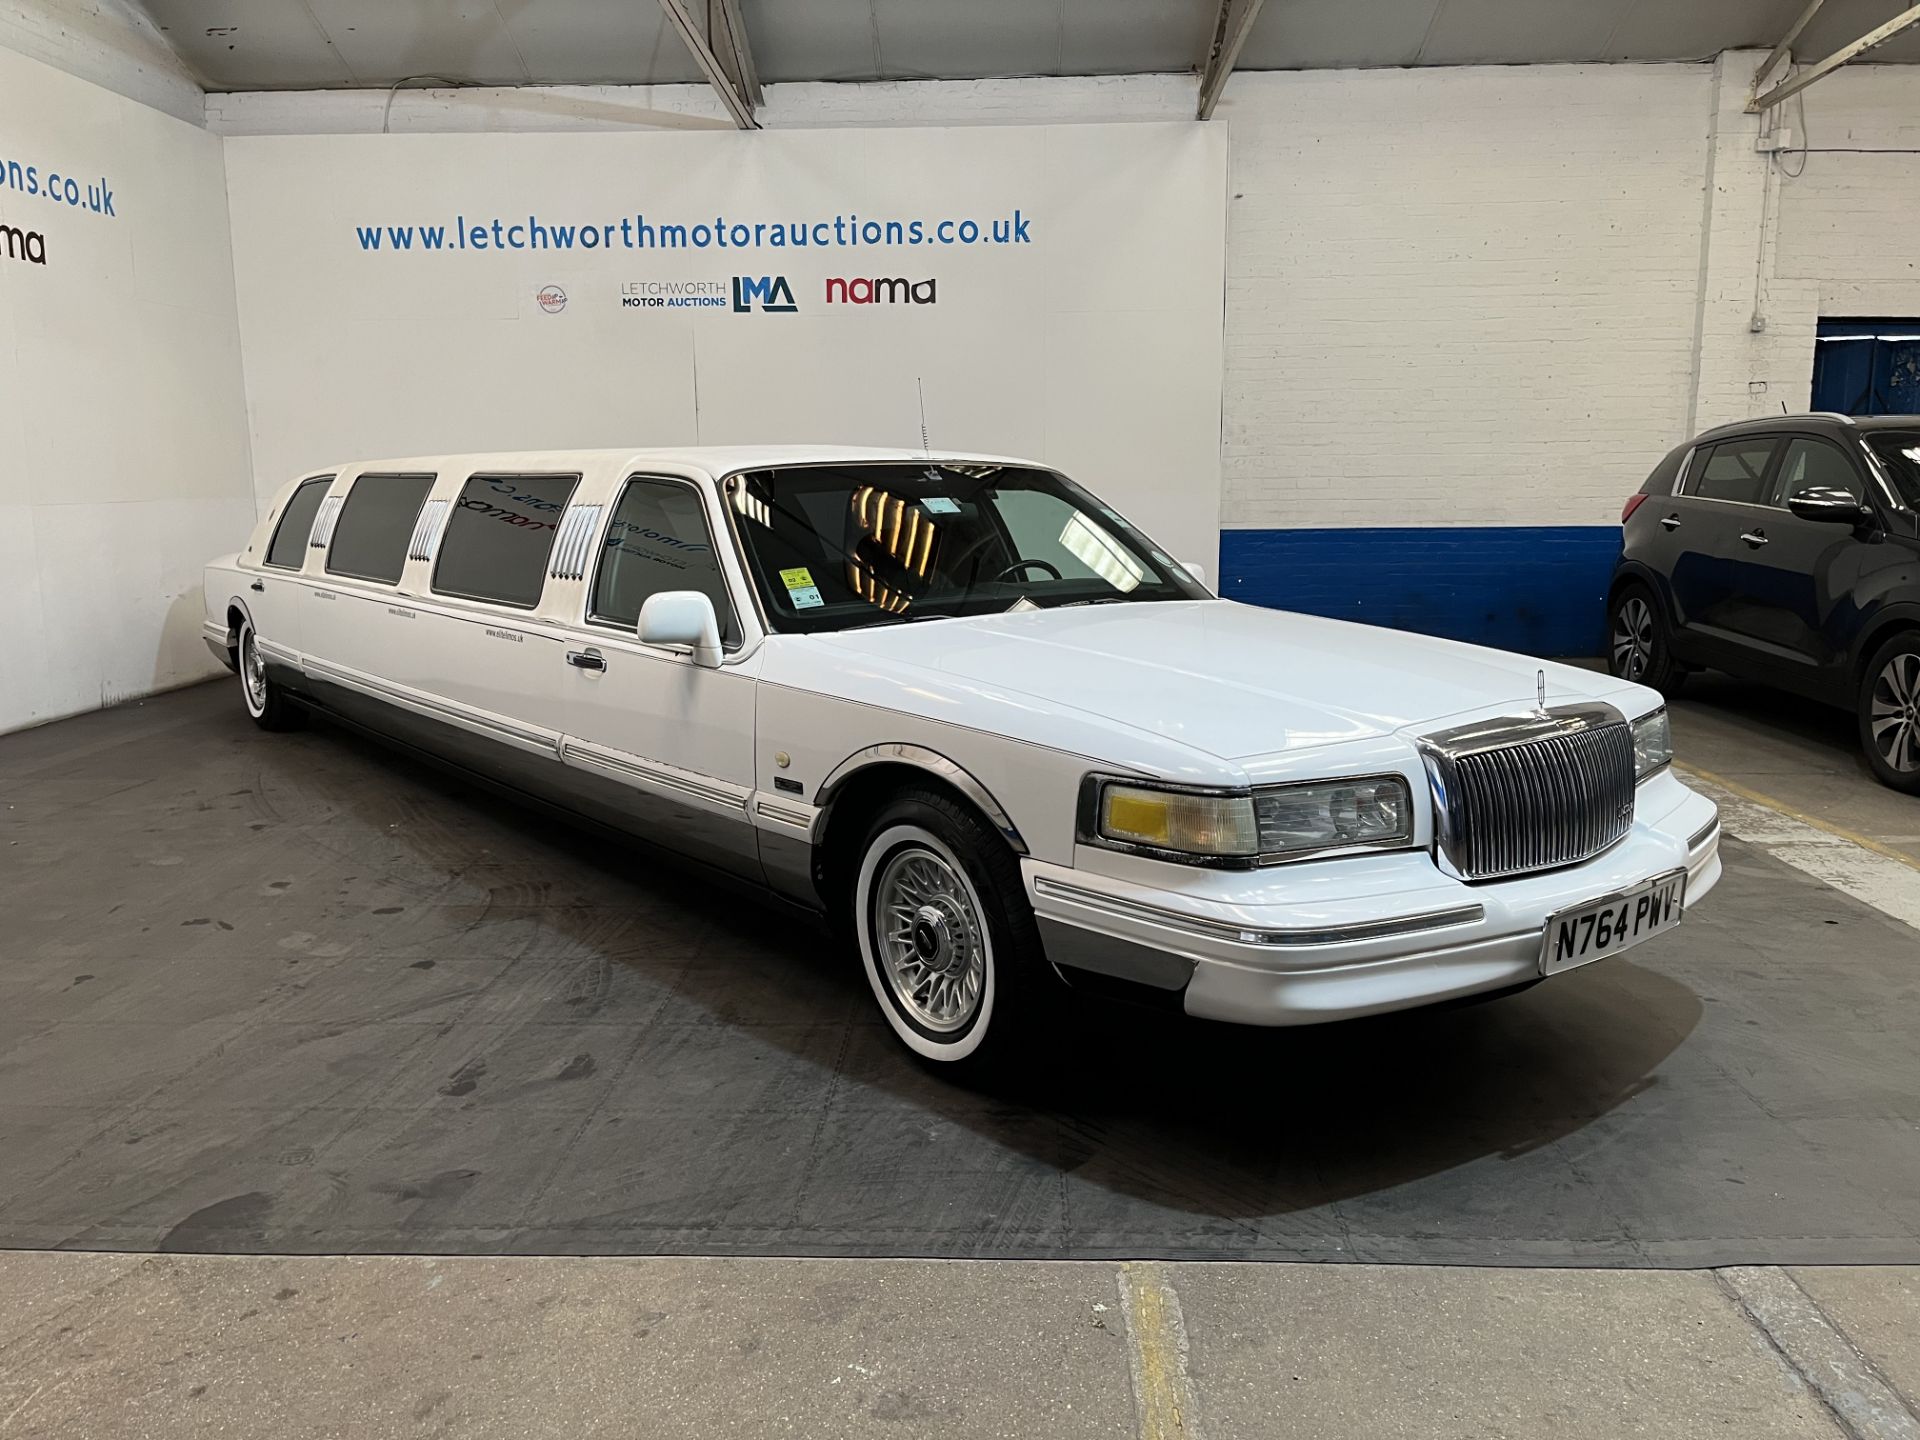 1996 Ford Lincoln Limousine LHD - 4600cc